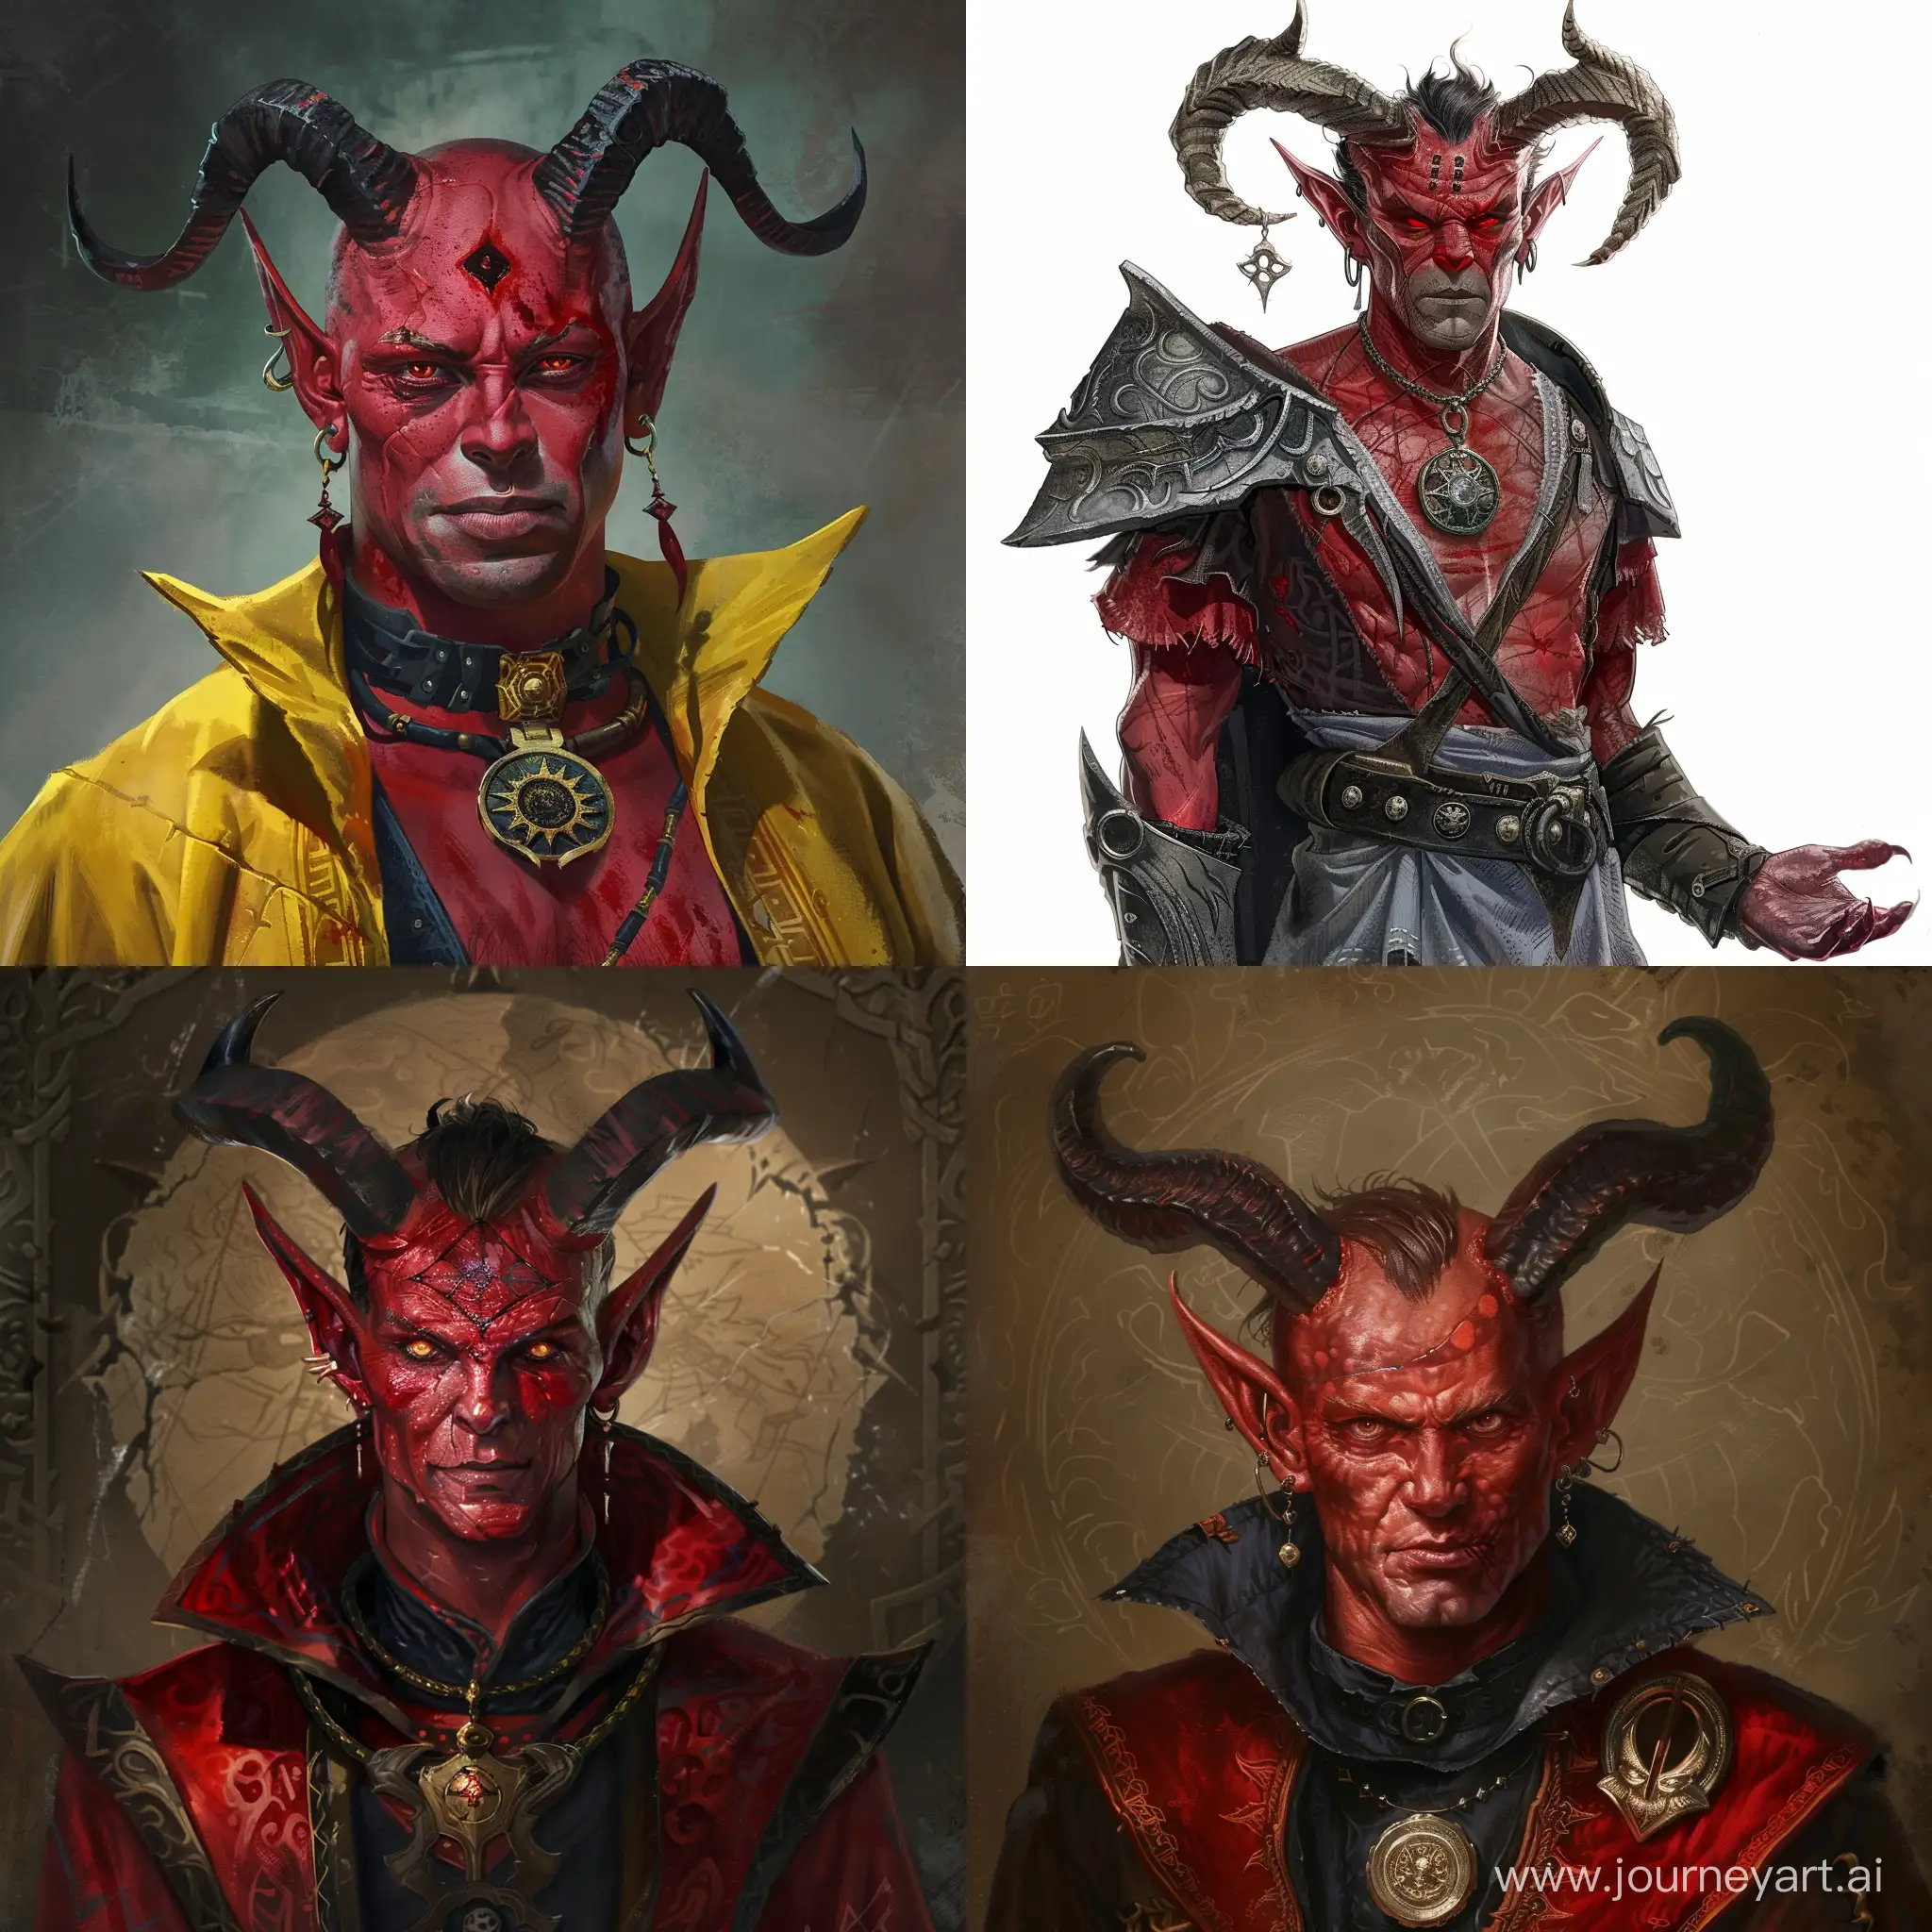 Blood-Demon-Apostle-Sinister-Cultist-with-Red-Skin-and-Horns